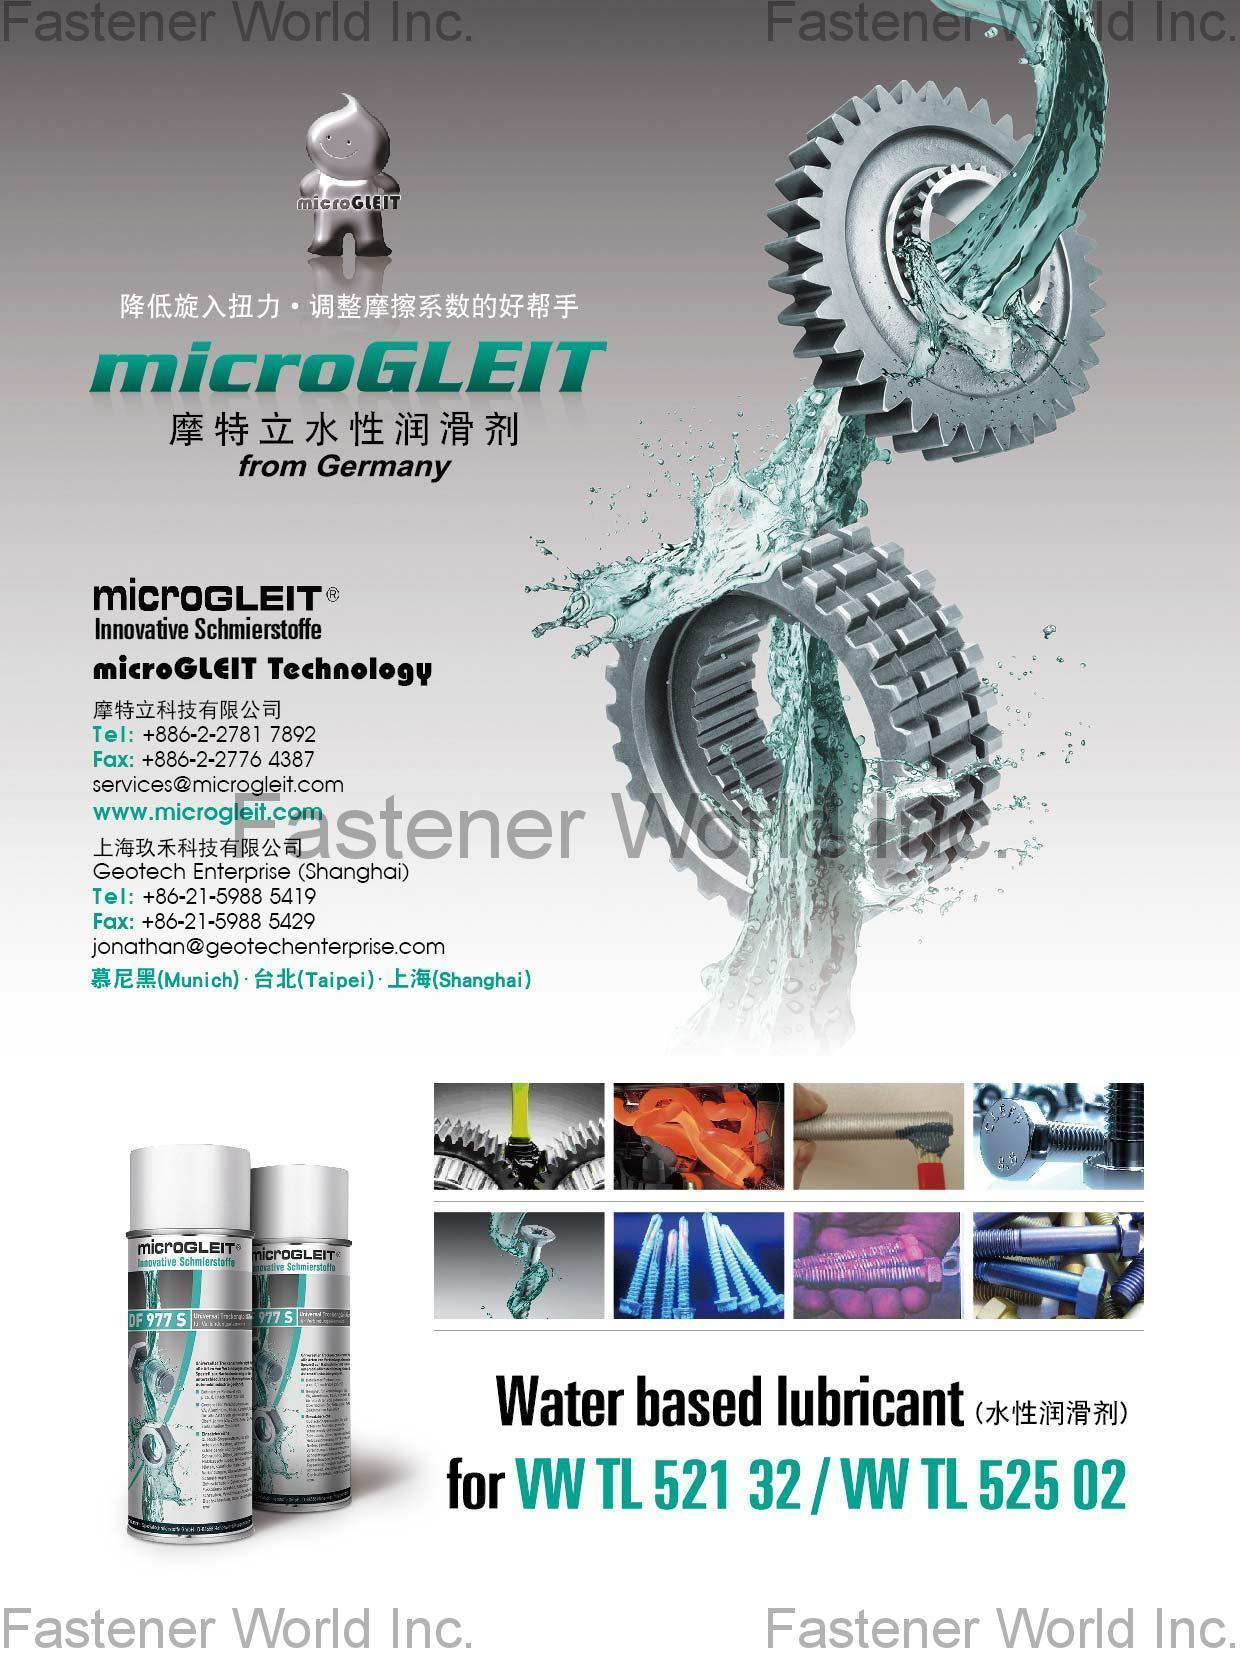 Lubricant MicroGleit Water Based Lubricant, Aluminum Lubricant, Alkaline Dry Film Lubricant, Acidic Dry Film Lubricant, PTFE Lubricant, Rescue Lubricant at Assembly, Coefficient of Friction, MoS2, Aluminum bolt, TAIWAN